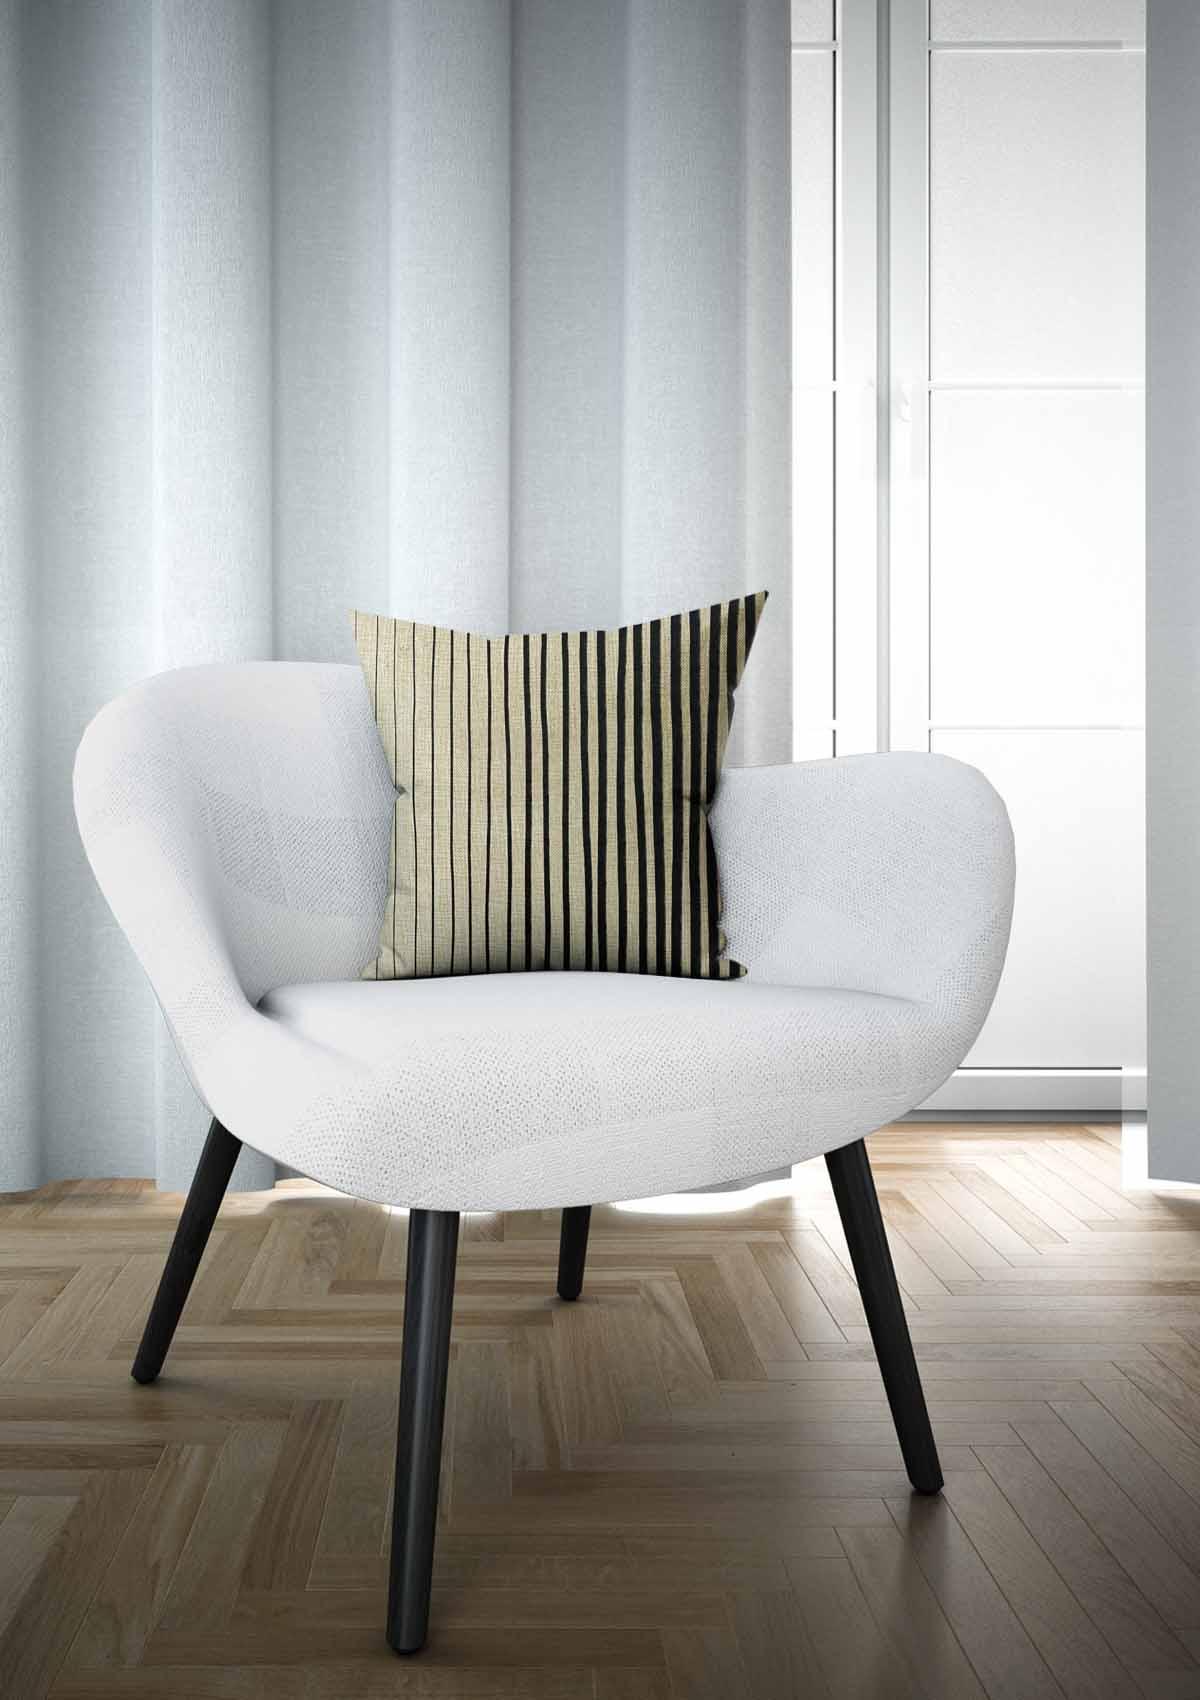 Black and White "Timeless" Striped Cushion Covers